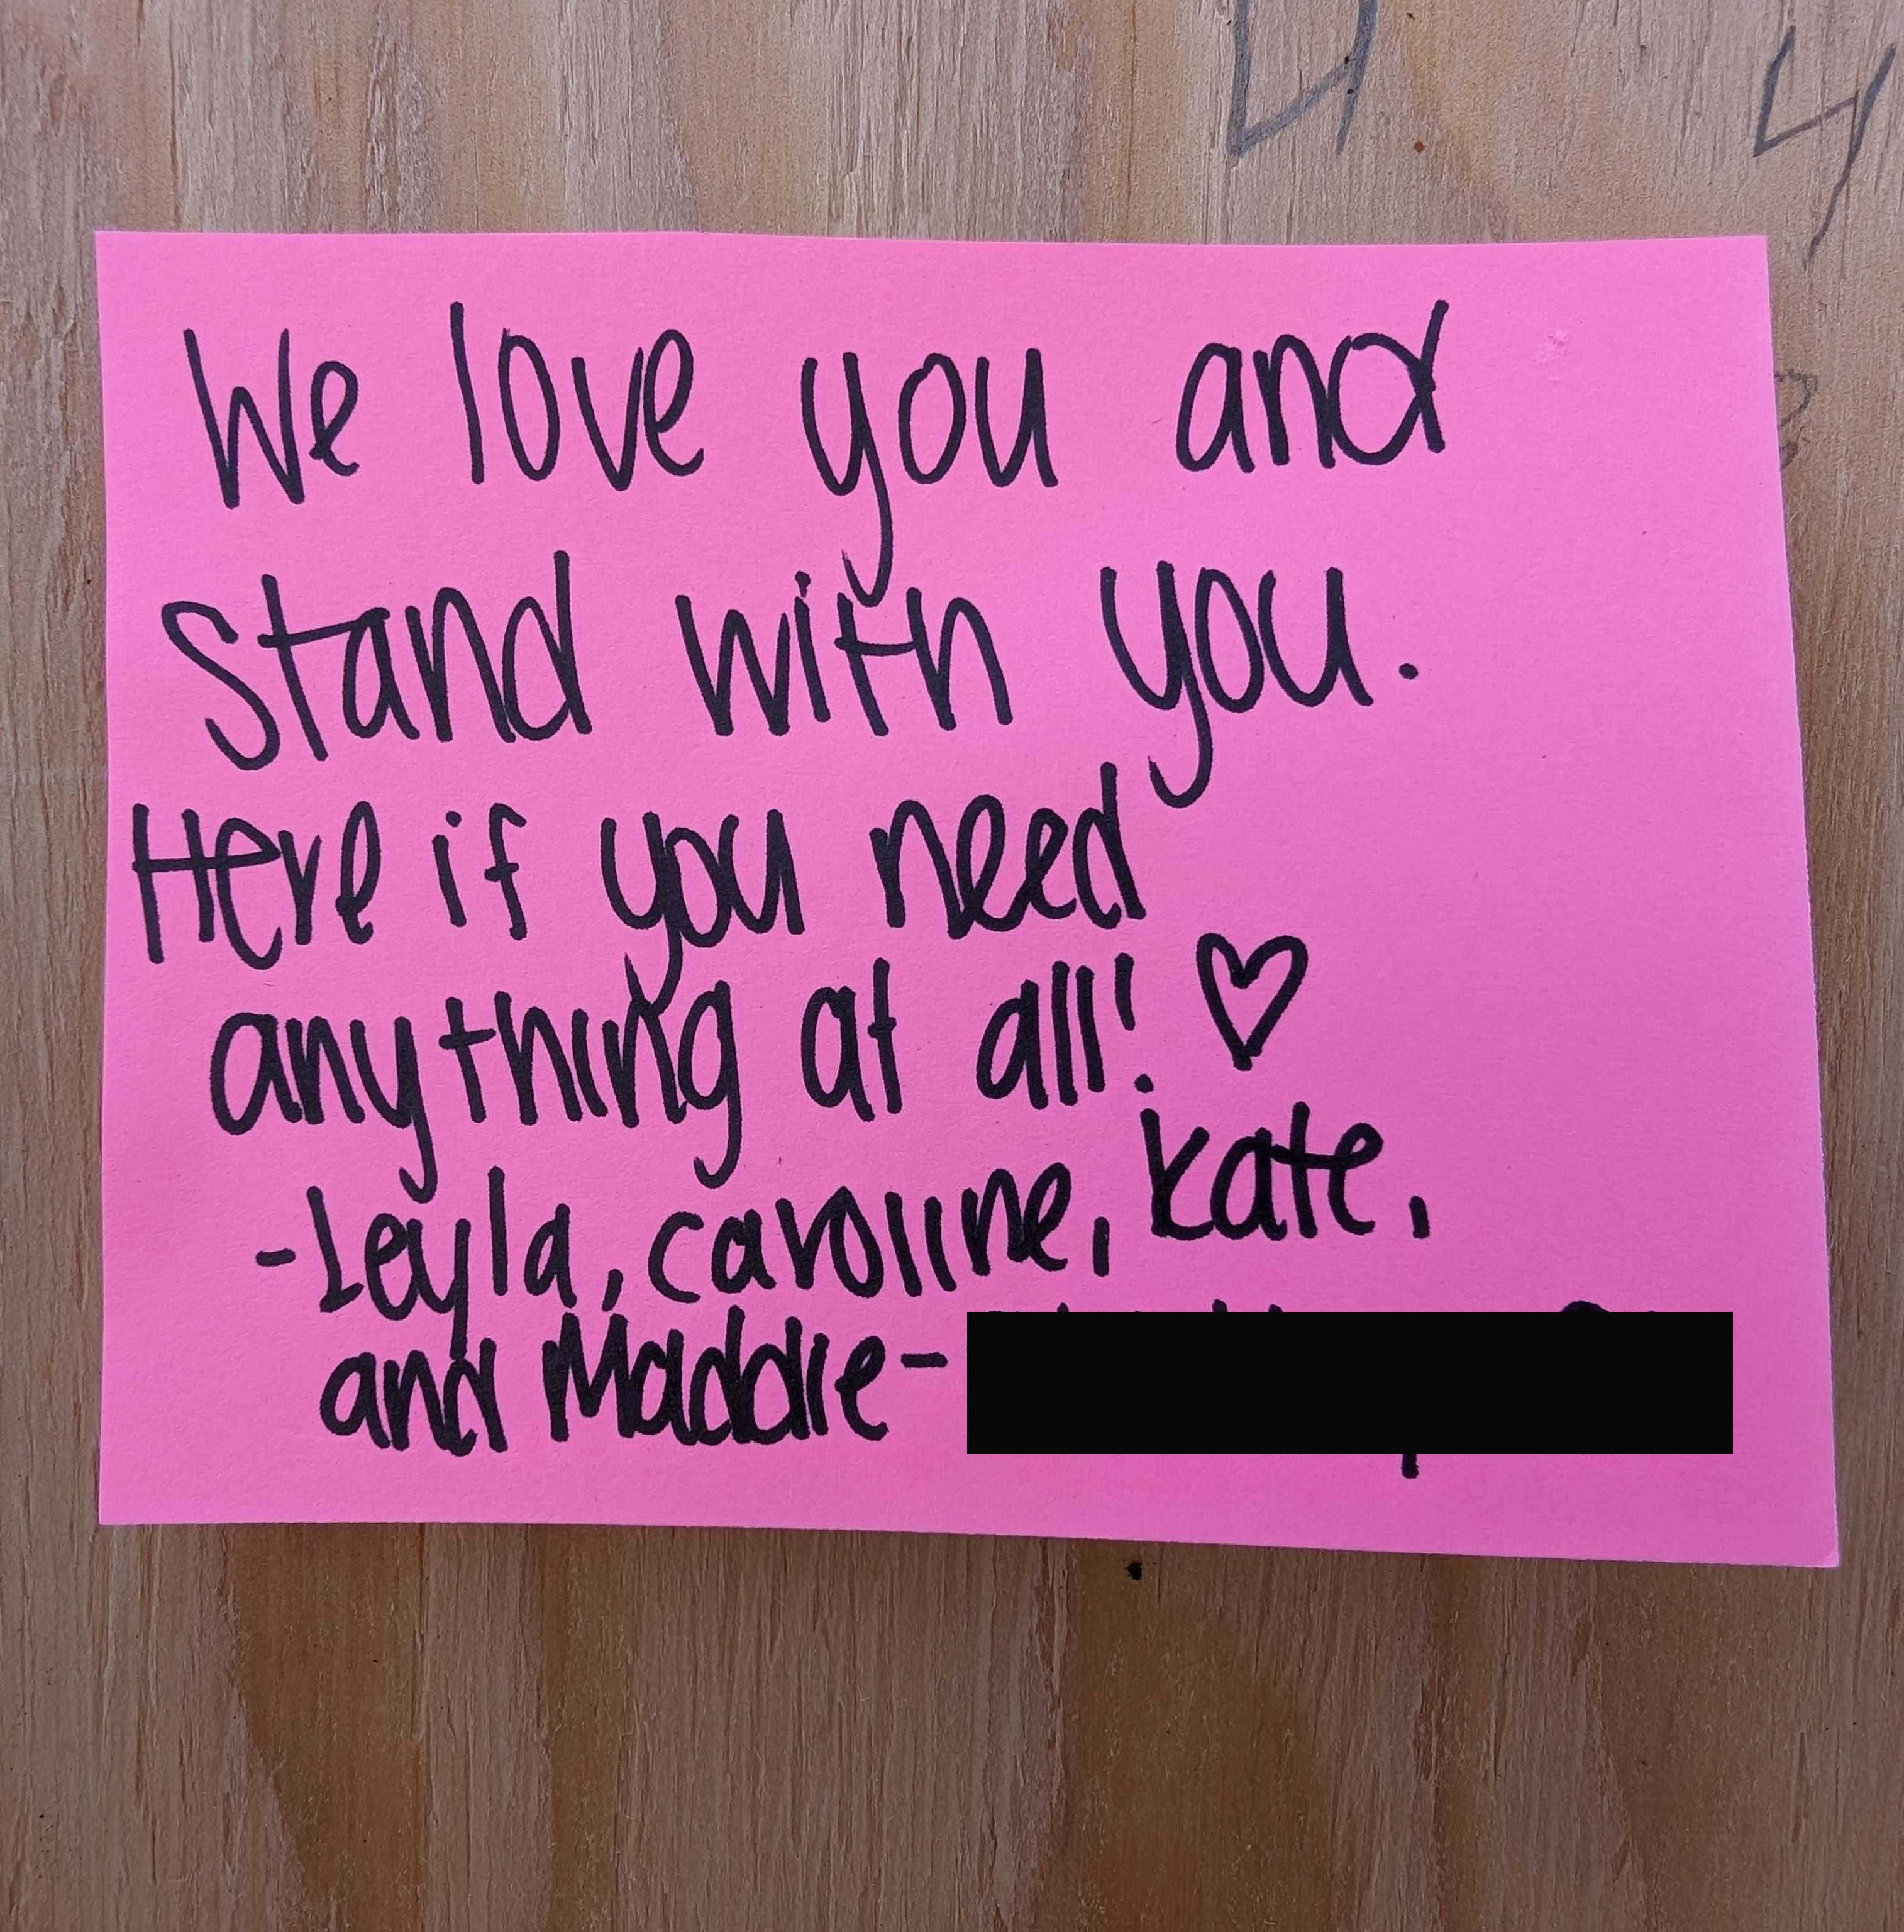 The image shows a pink note with black handwritten text that reads: &quot;We love you and stand with you. Here if you need anything at all! ♥ -Leyla, Caroline, Kate and Maddie&quot;.